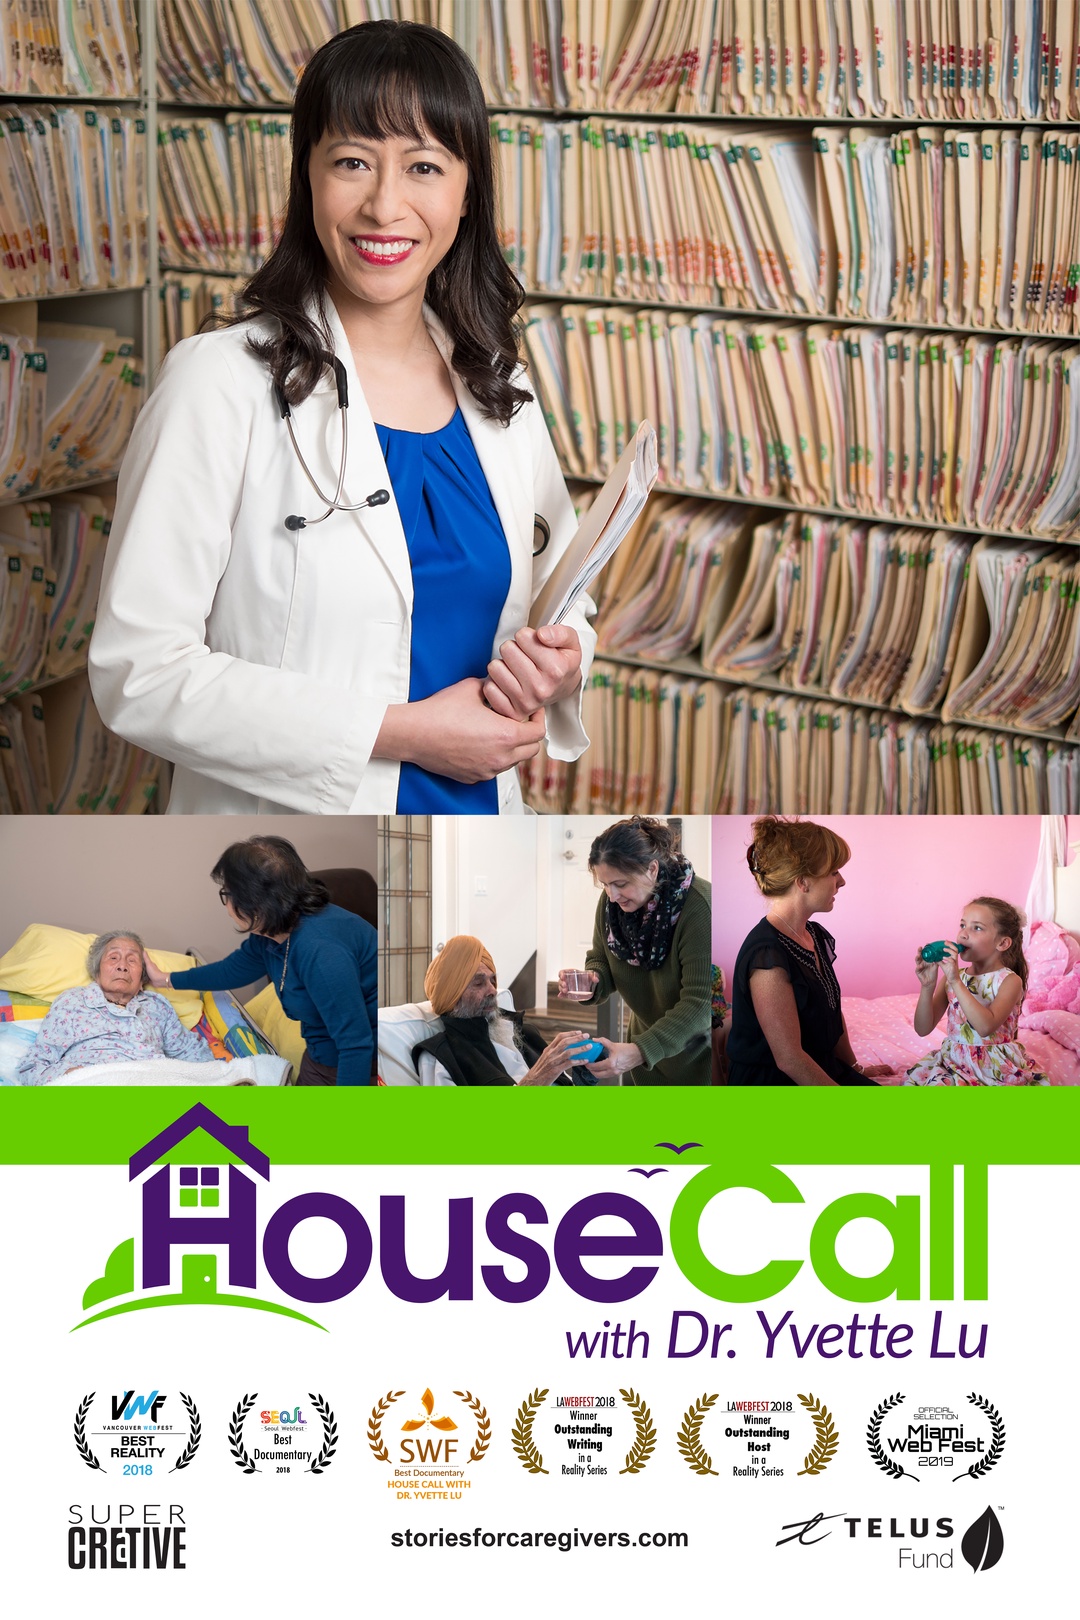 House Call with Dr. Yvette Lu